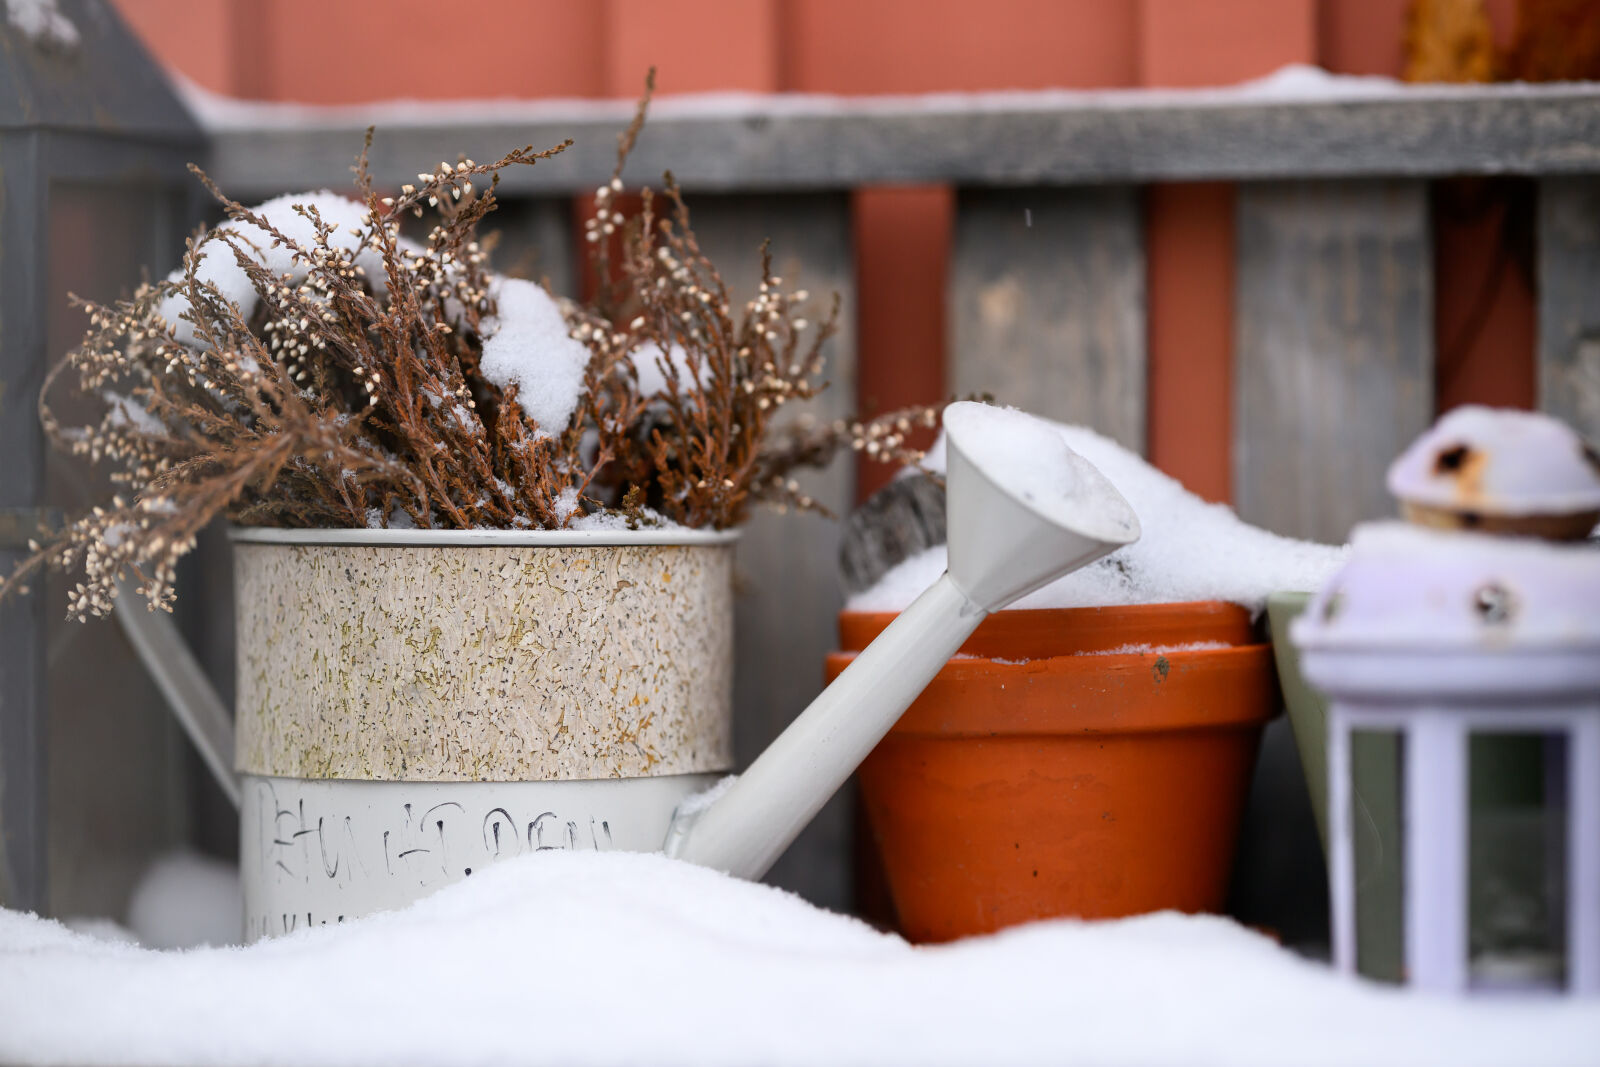 Nikon Z9 sample photo. Winter watering can photography